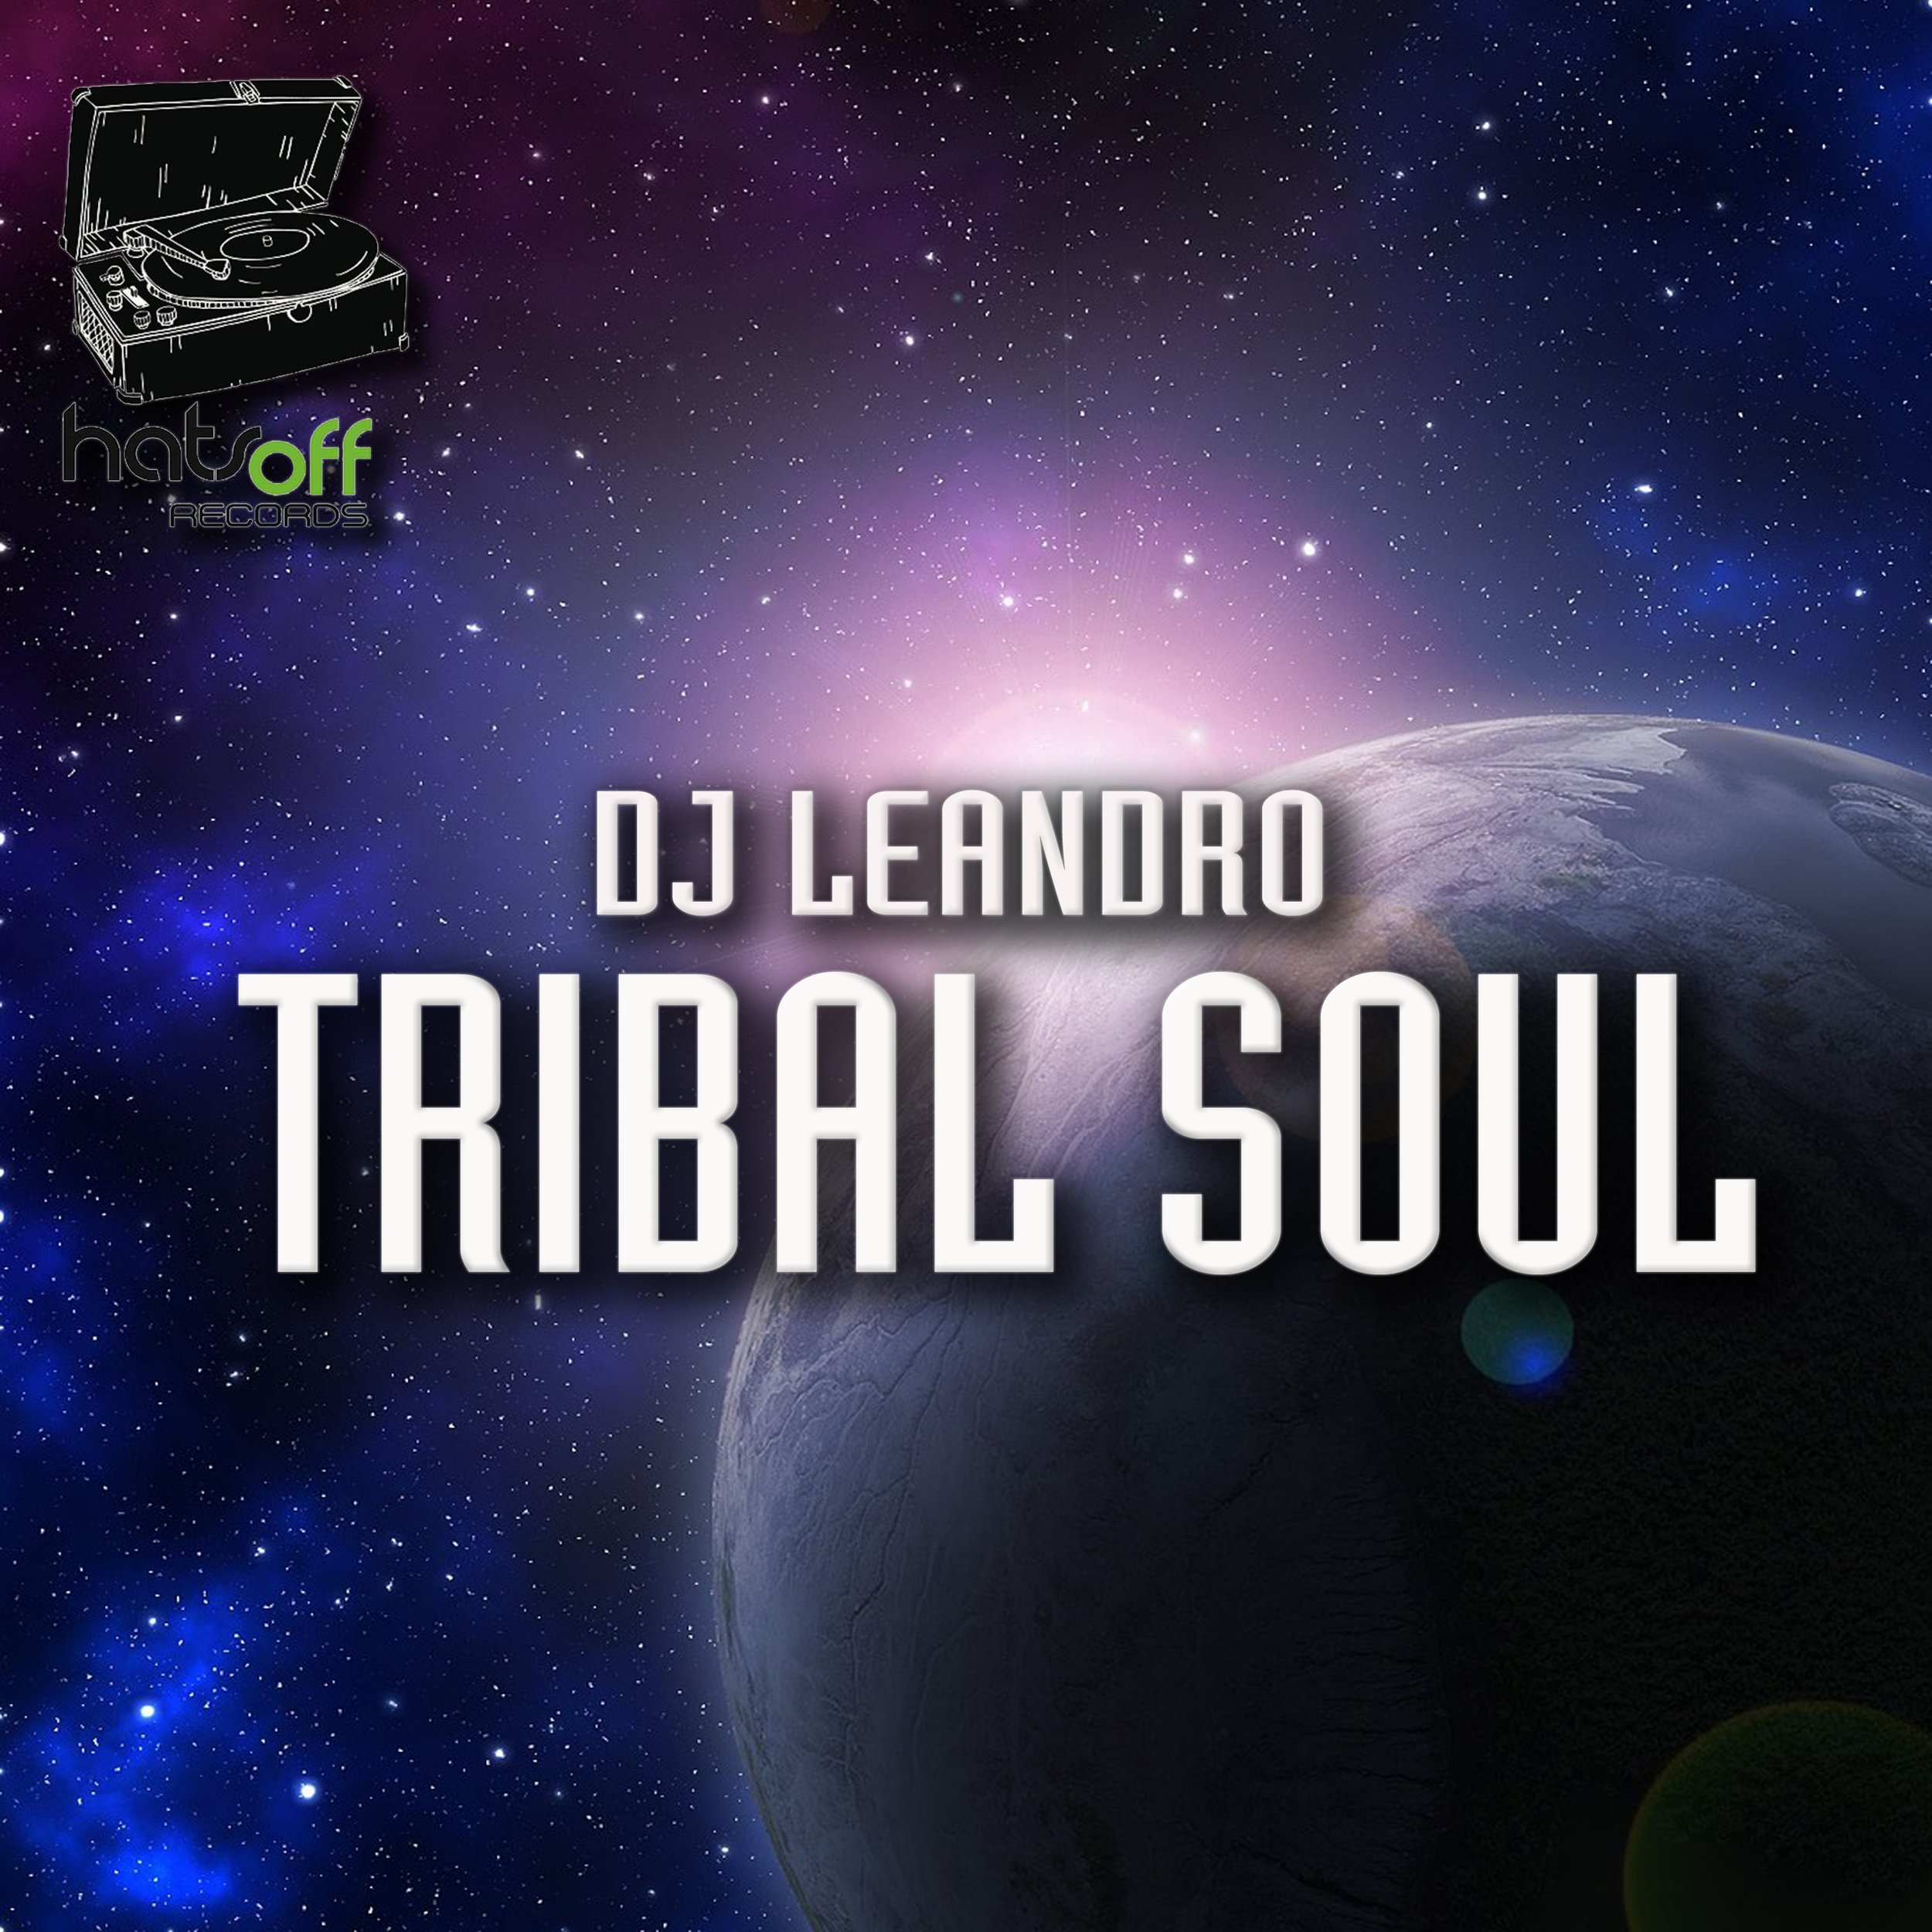 Tribal Soul (Hats Off Records)